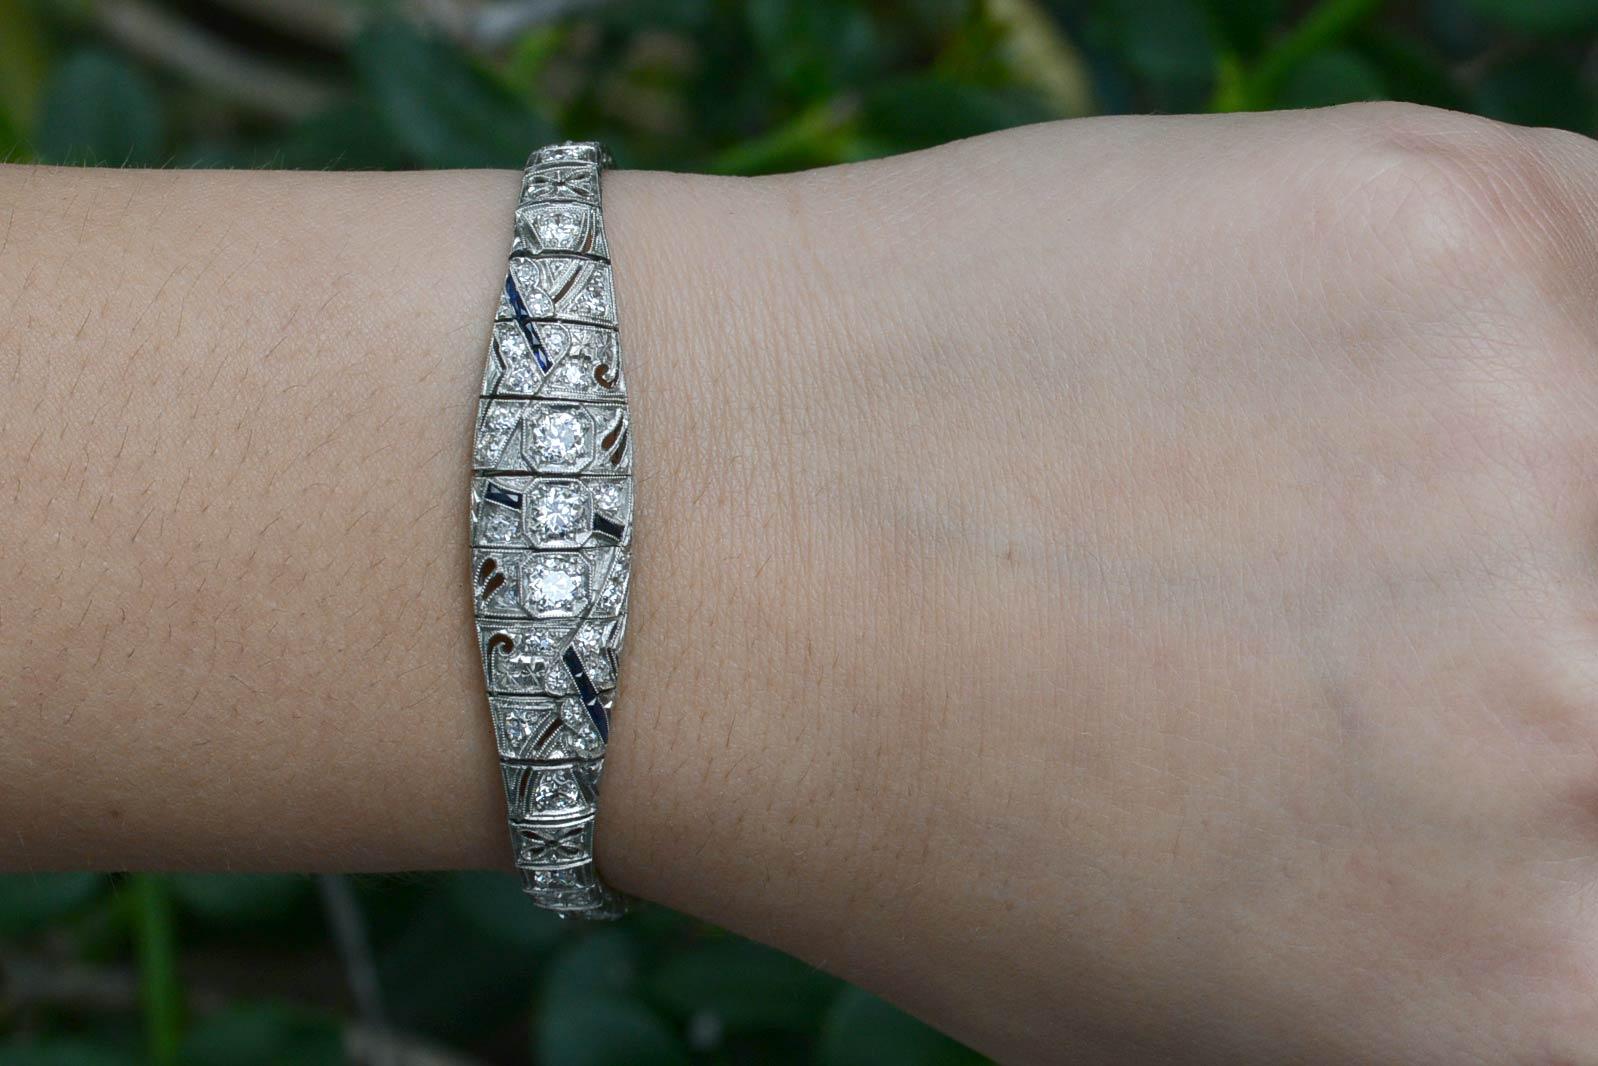 A sleek, geometric Art Deco platinum bracelet adorned with filigree and over 3 carats of fiery old European cut diamonds. These antique cuts with larger, chunky facets are so juicy and the links drape so softly on the wrist. The asymmetrical design